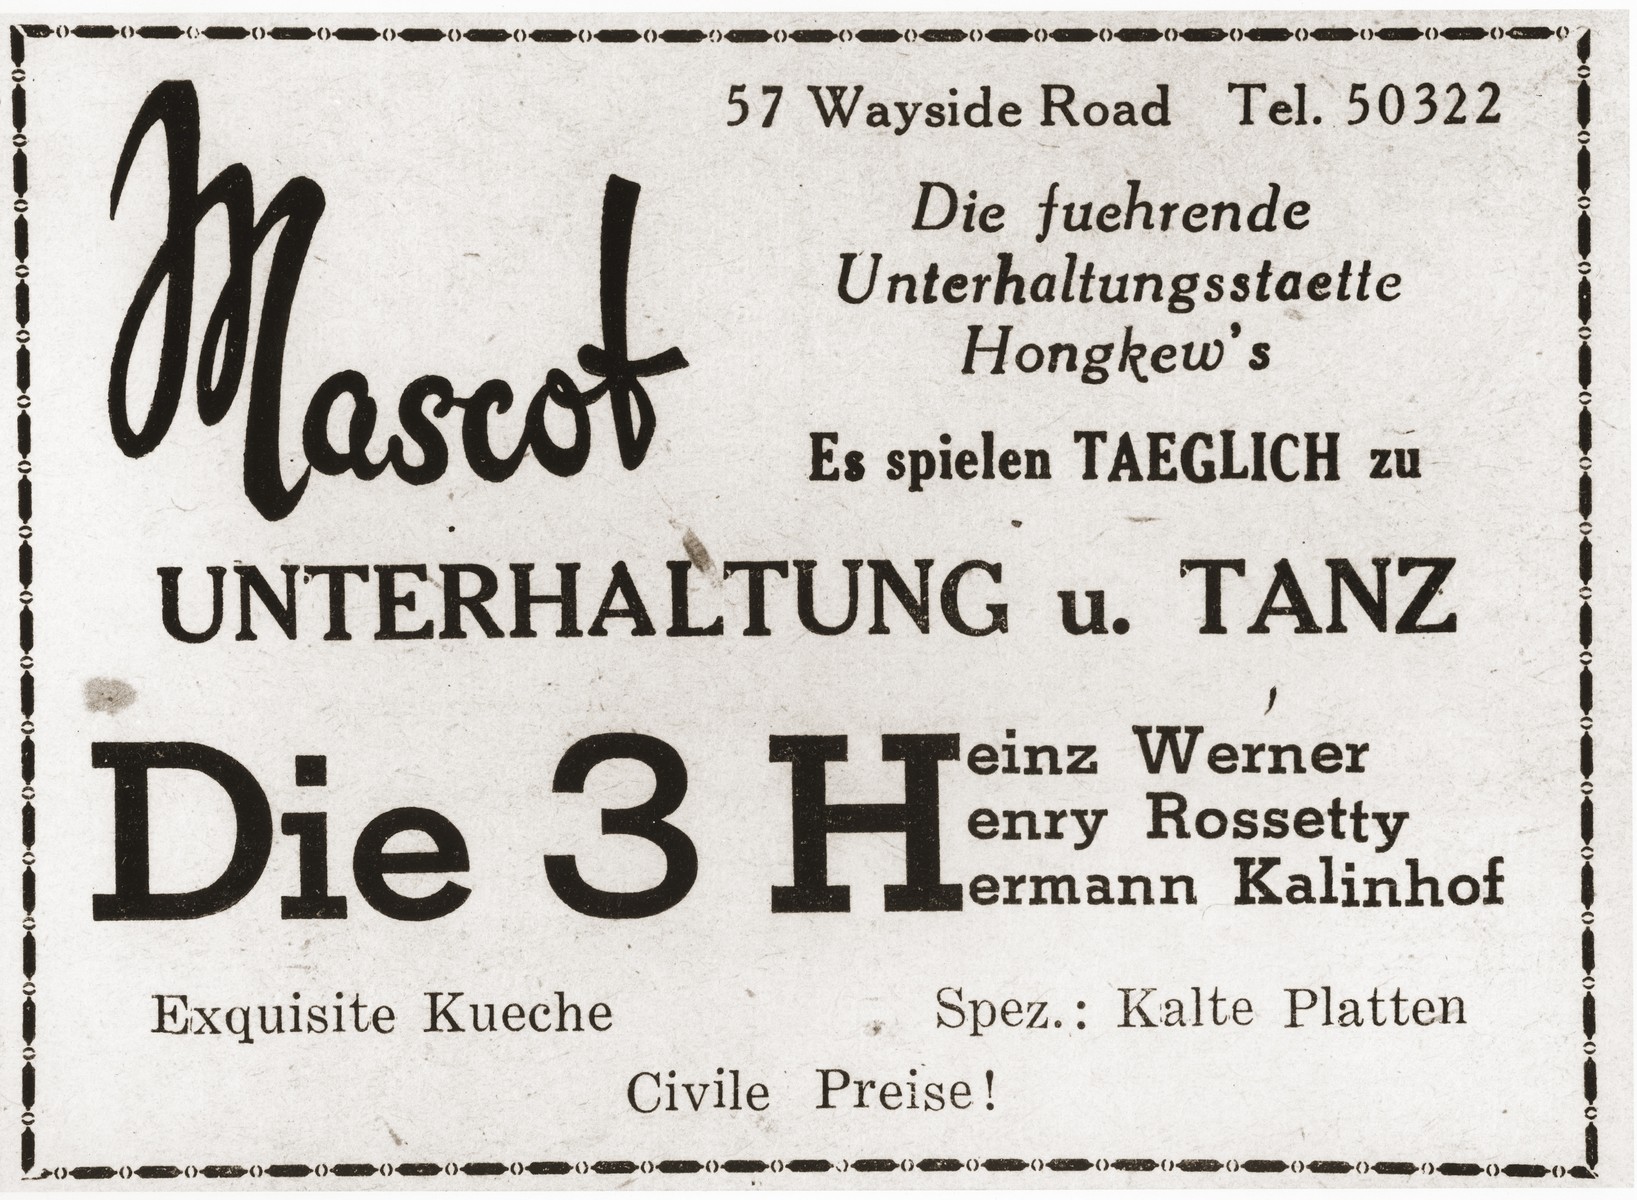 Advertisement  for "Mascot," a restaurant and club operated by German Jewish refugees on Wayside Road in Shanghai.